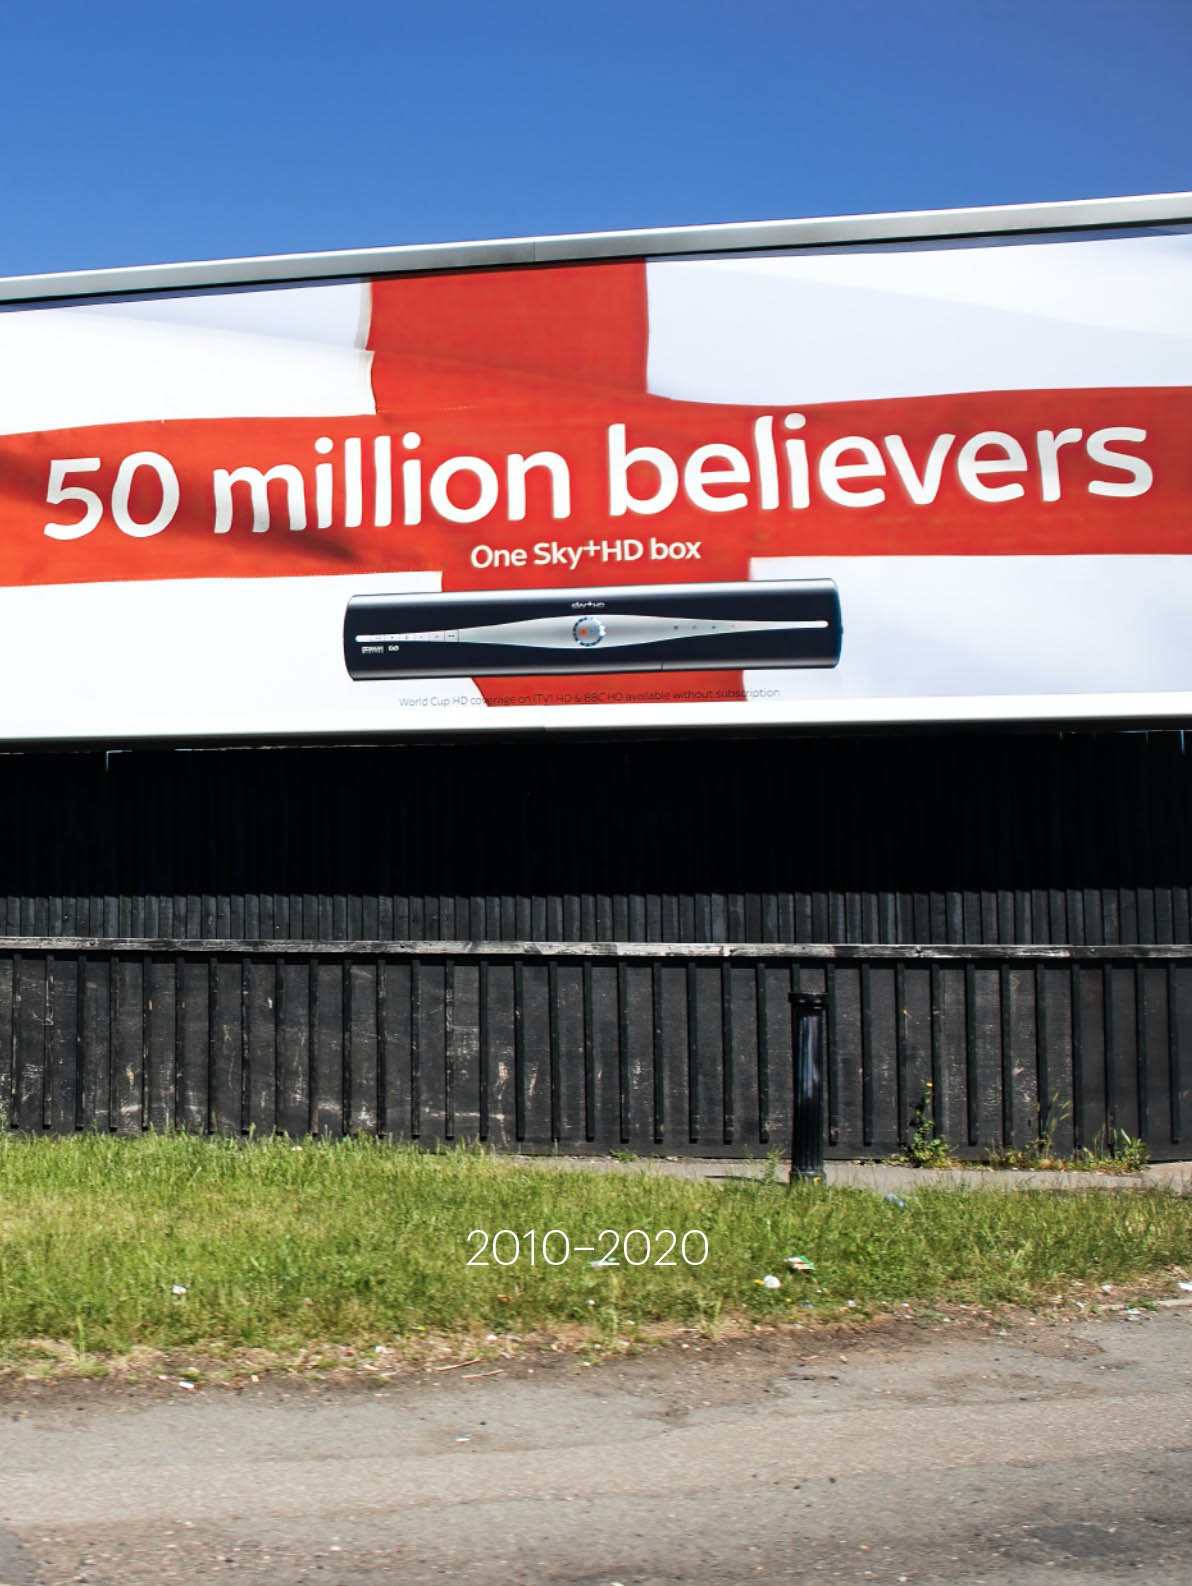 Book cover showing a billboard advertisement with a union jack image